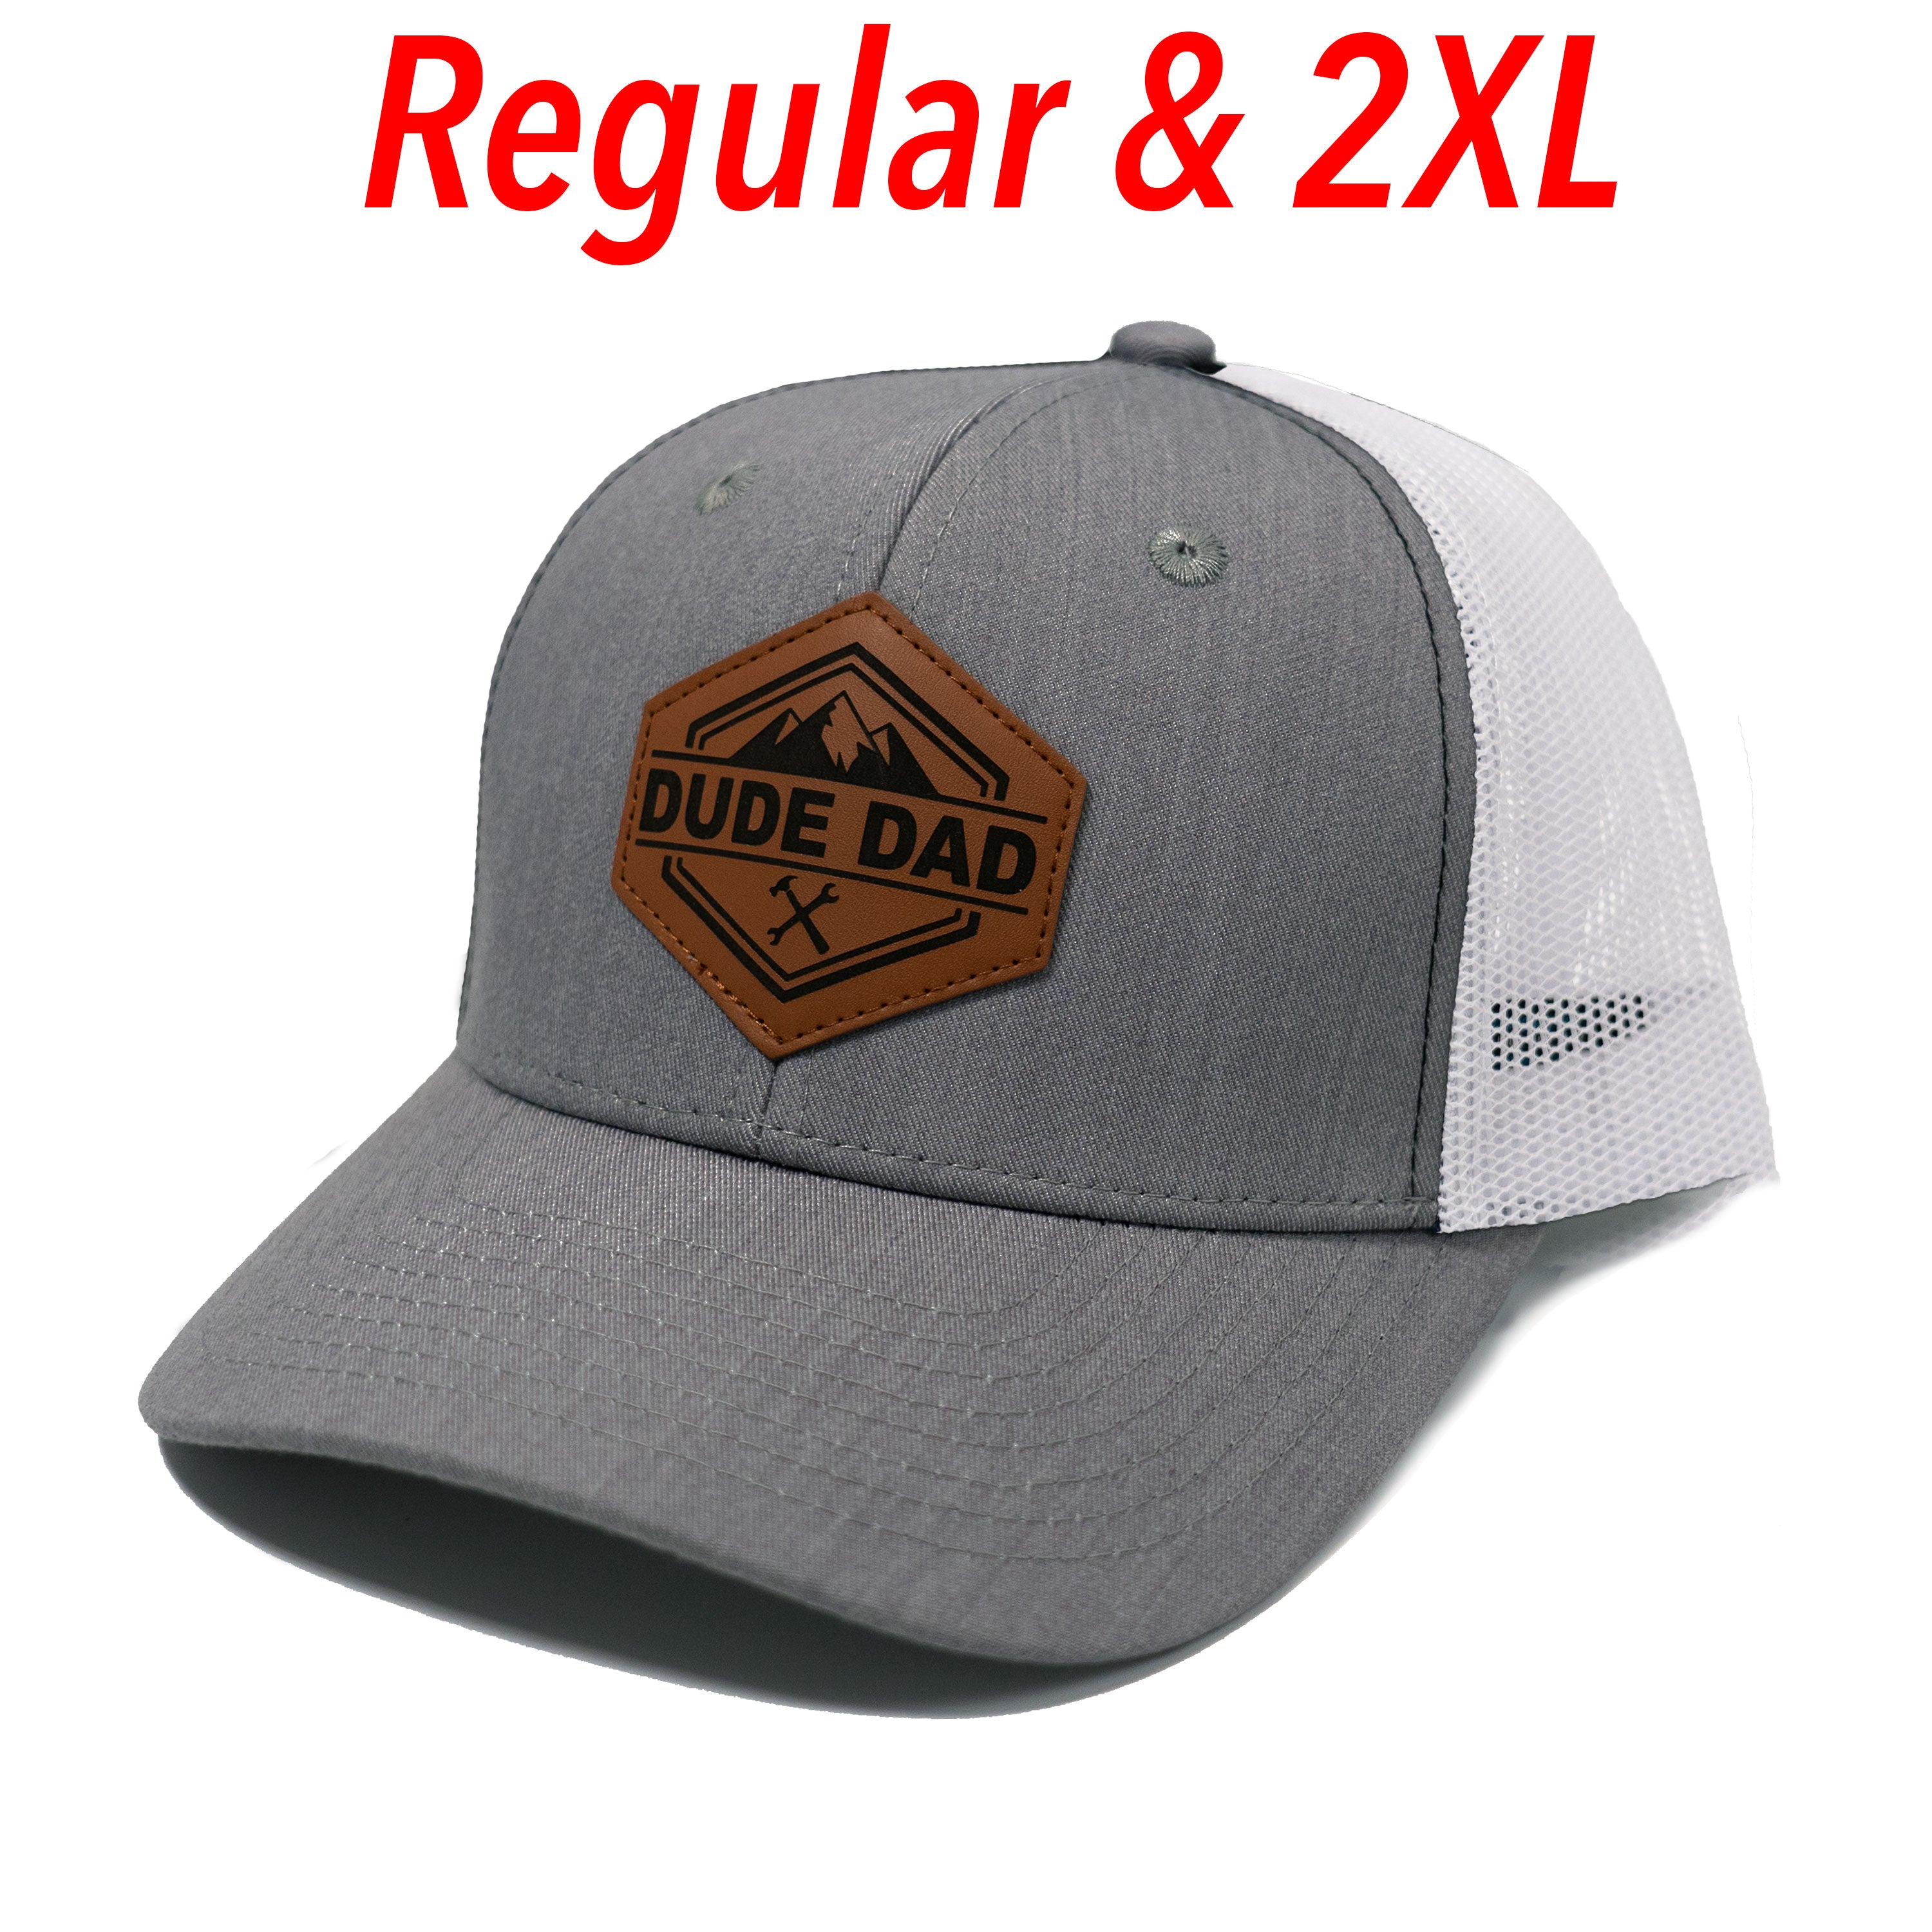 Faux Leather Patch Hat - Grey/White Trucker Snapback 2XL (61cm)